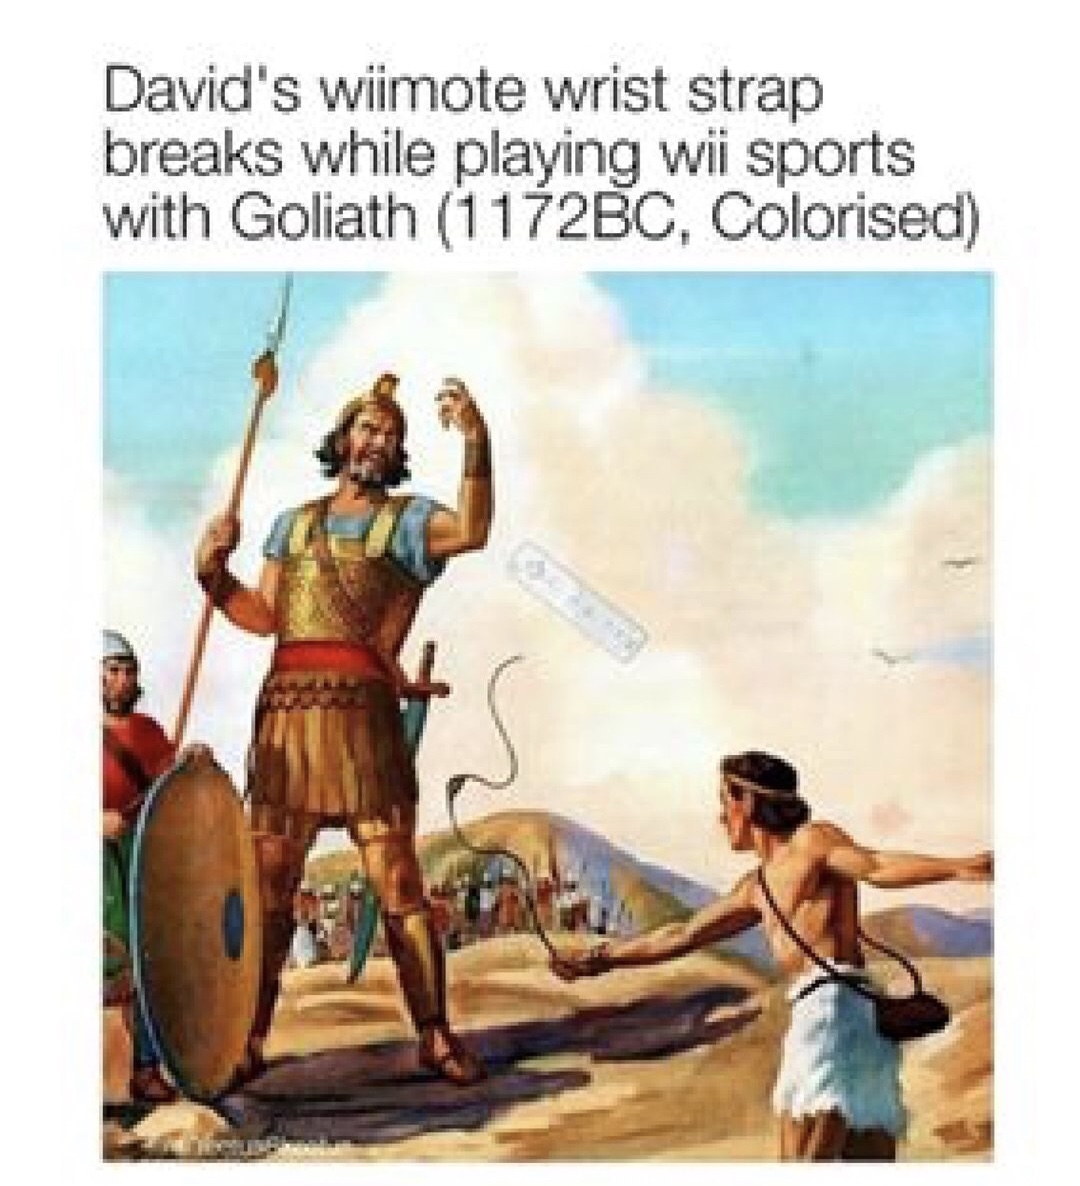 david vs goliath - David's wiimote wrist strap breaks while playing wii sports with Goliath 1172BC, Colorised